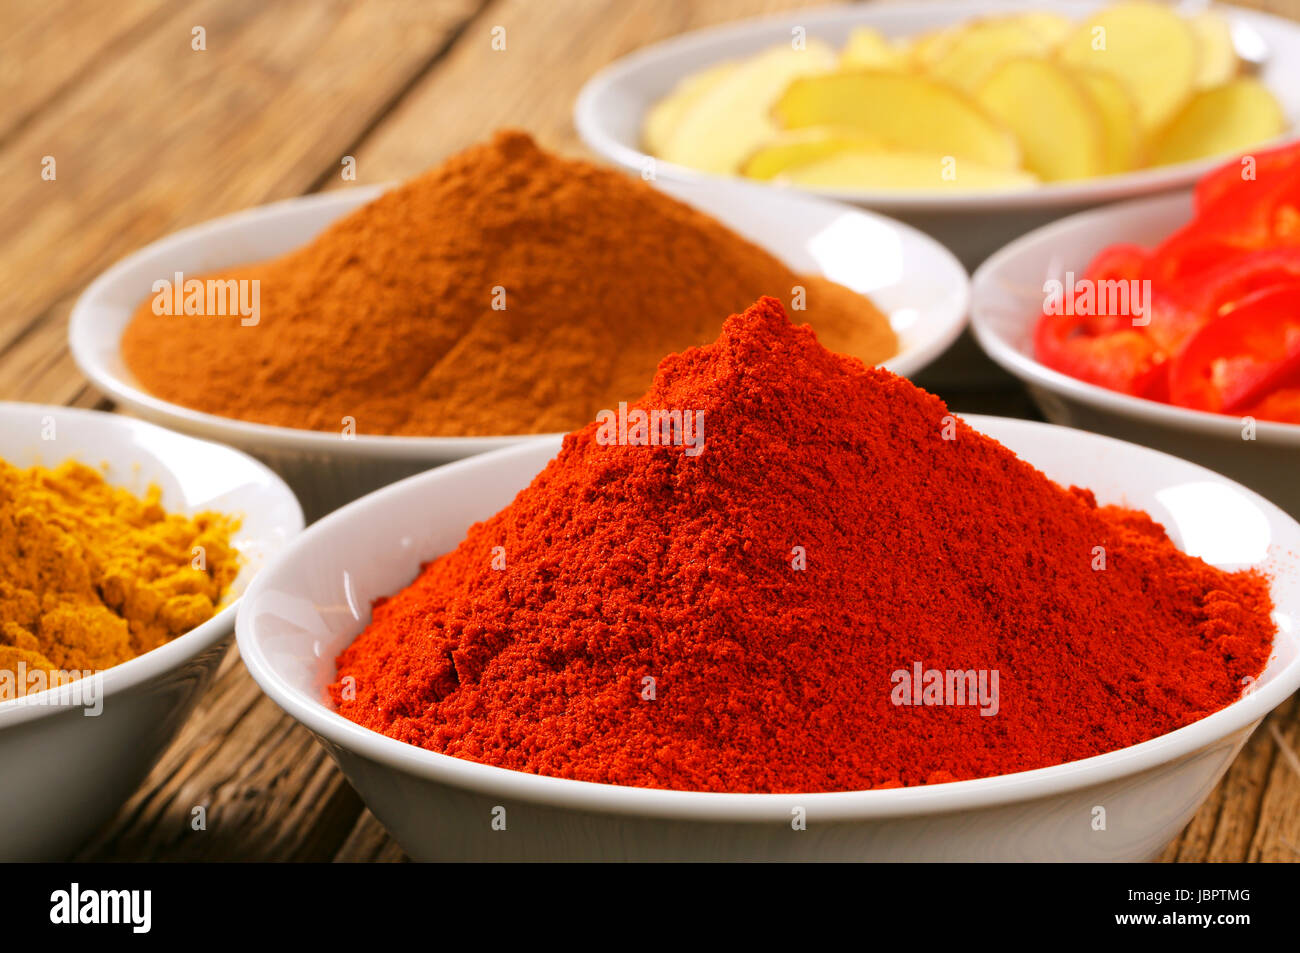 Bowls of curry powder, paprika,  ground cinnamon, sliced ginger root and red pepper Stock Photo